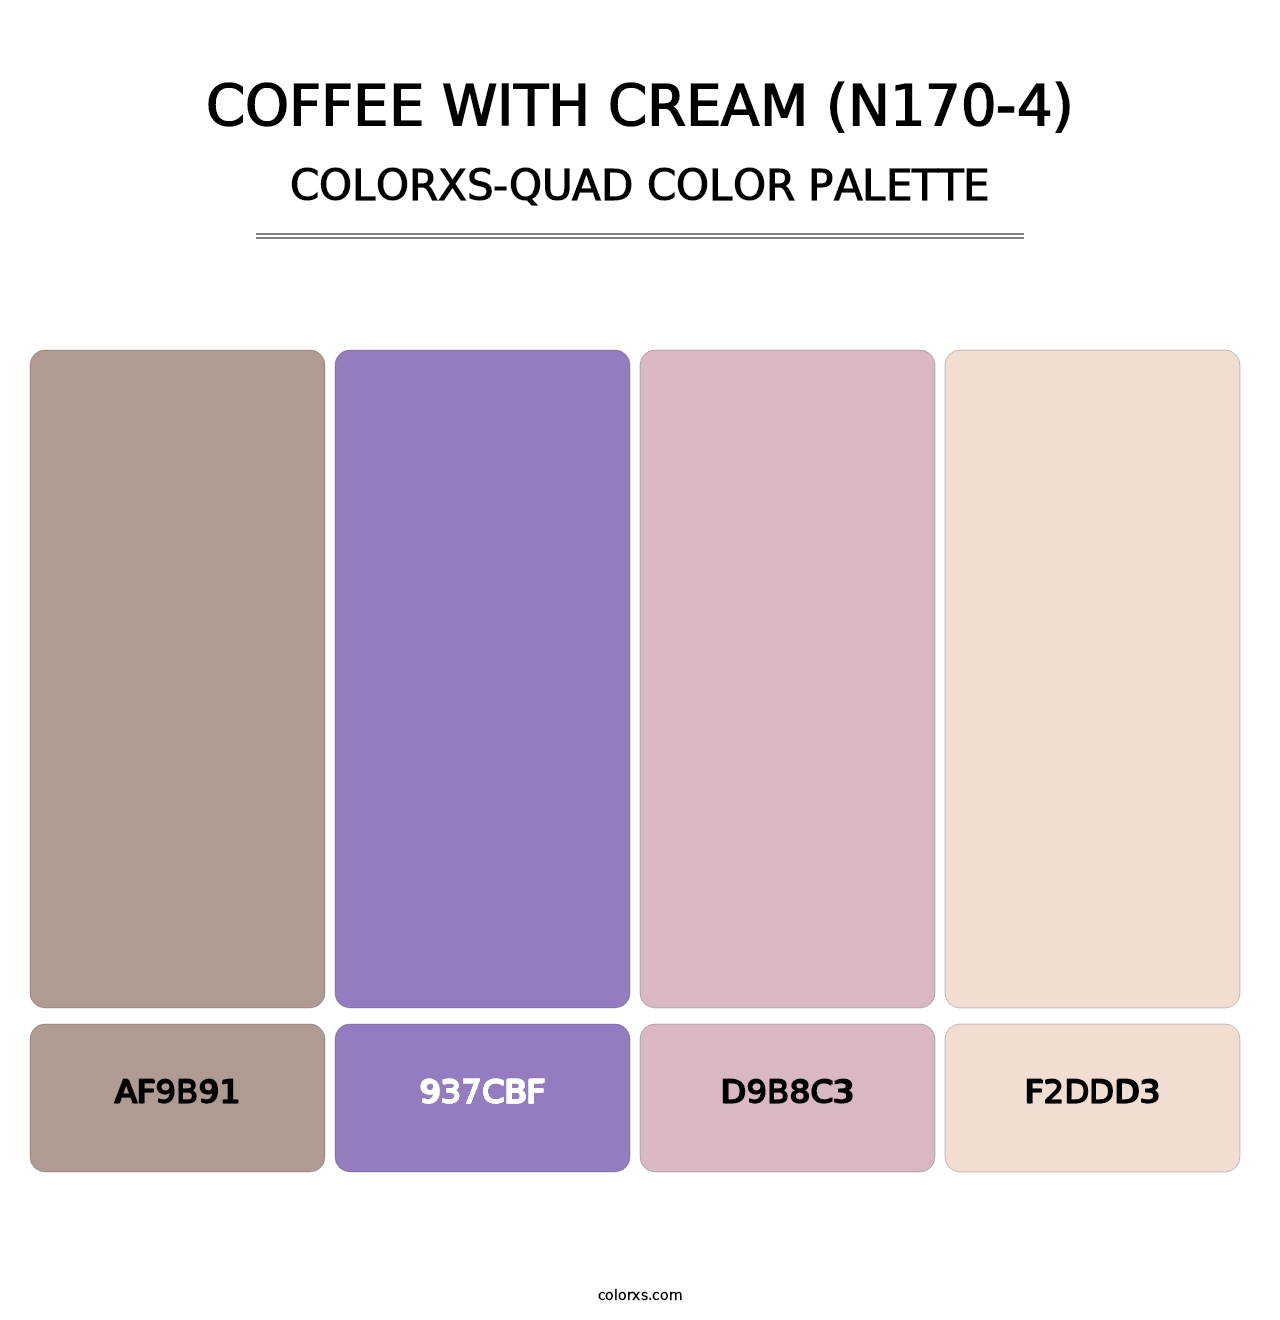 Coffee With Cream (N170-4) - Colorxs Quad Palette